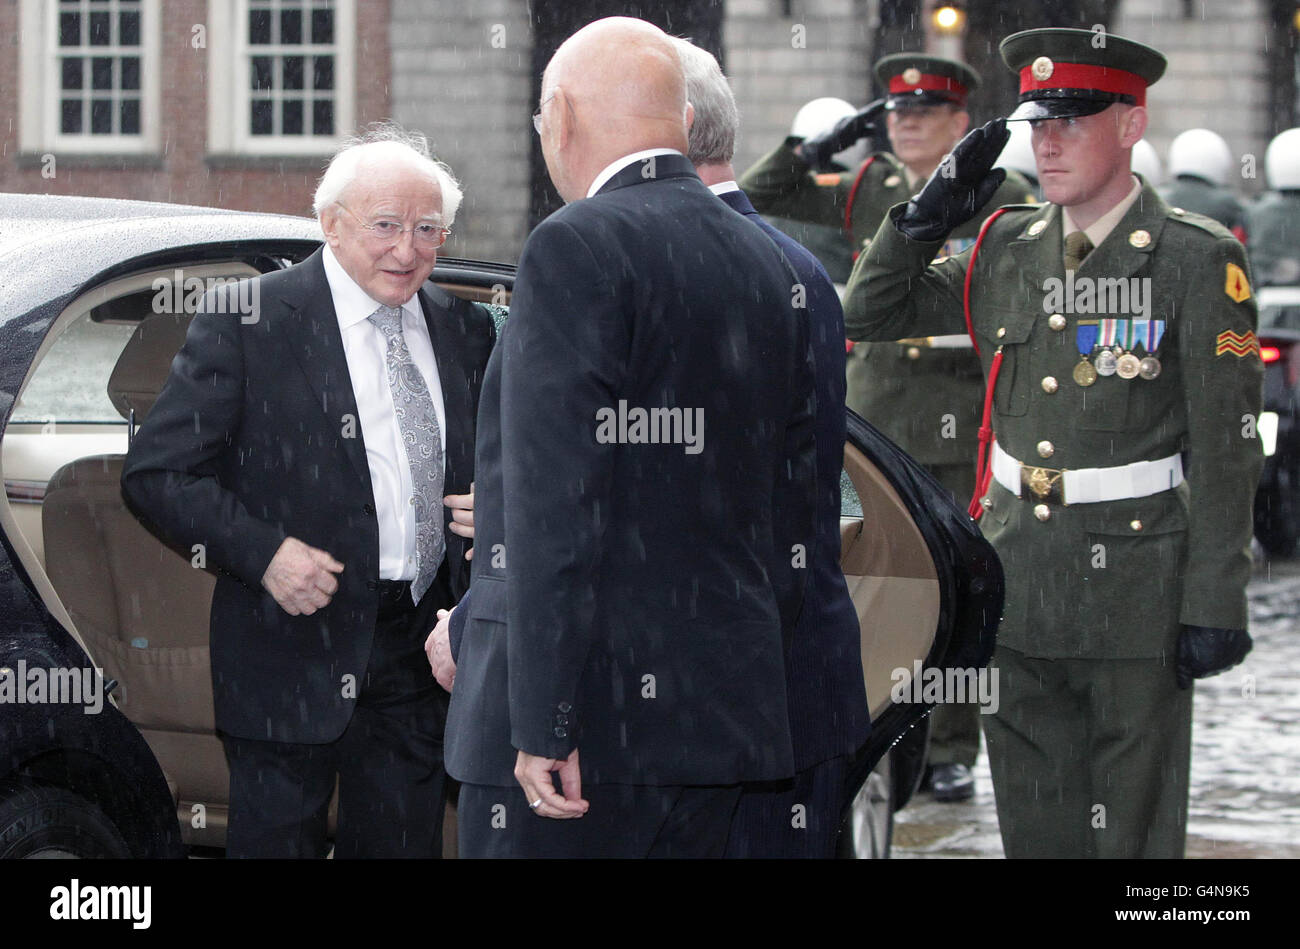 President-elect Michael D Higgins arrives for his inauguration ceremony as Ireland's ninth head of state at Dublin Castle today. PRESS ASSOCIATION. Picture date: Friday November 11, 2011. See PA story IRISH President. Photo credit should read: Niall Carson/PA Wire Stock Photo